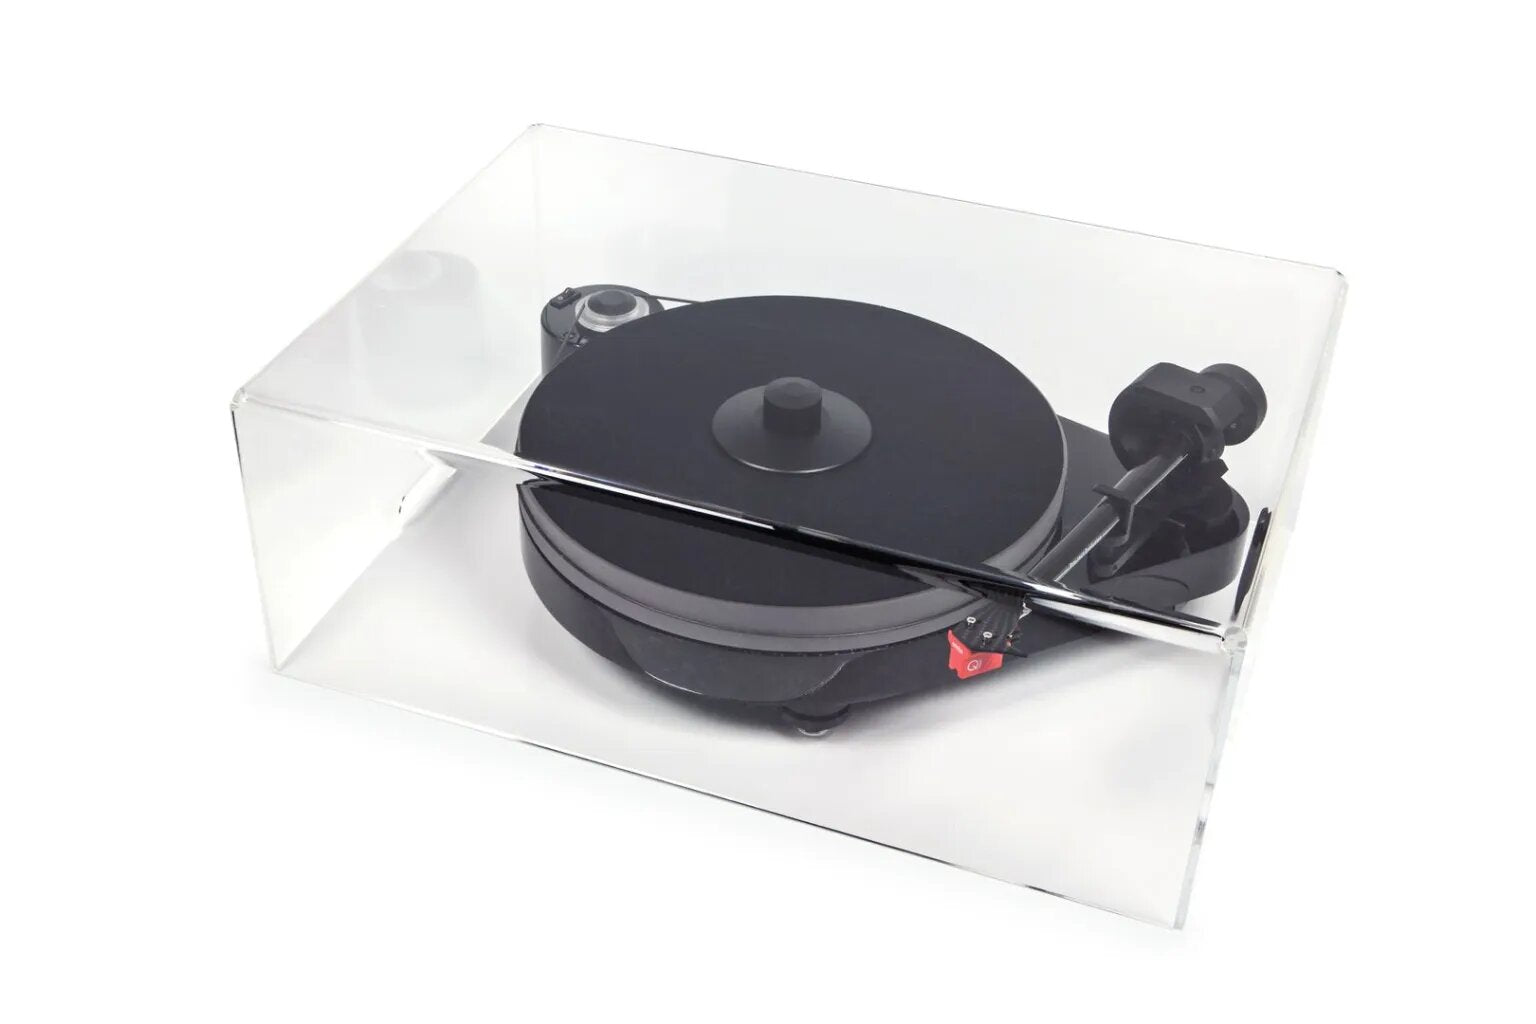 Dust cover Crystal clear acrylic cover for turntables Protects turntable and needle suitable for: RPM 5 Carbon - RPM 9 Carbon